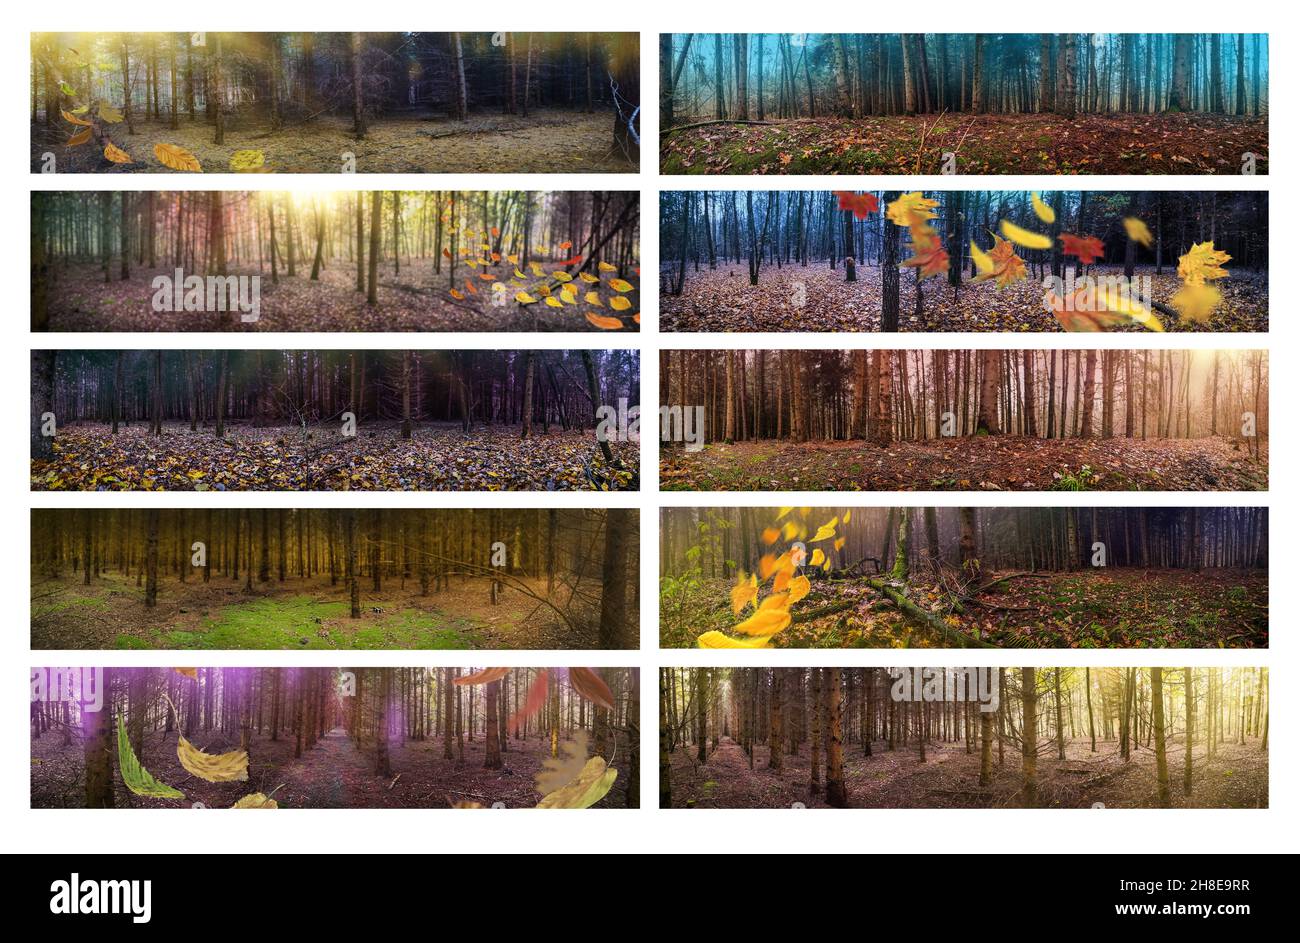 Panoramic photo of forest in autumn with colorful autumn leaves. Wide format photos collage. Stock Photo